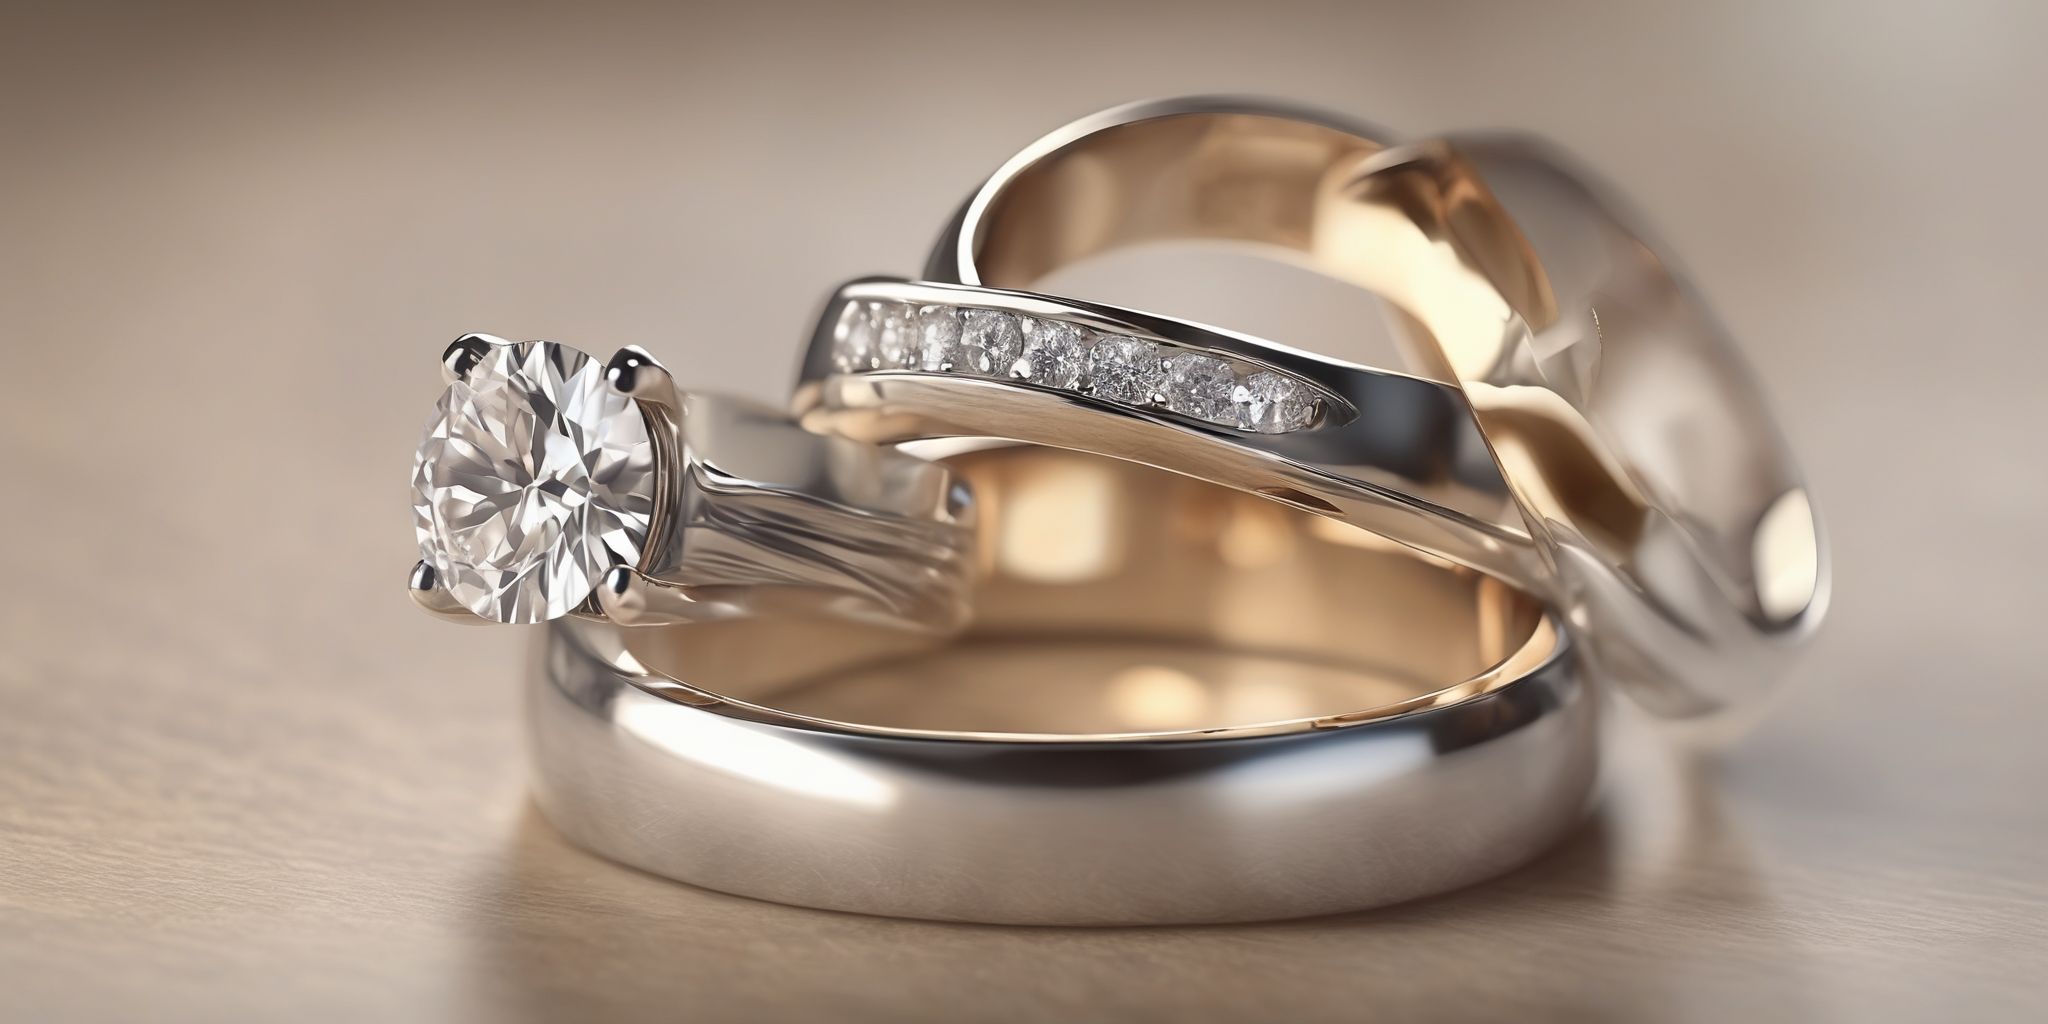 Wedding band  in realistic, photographic style